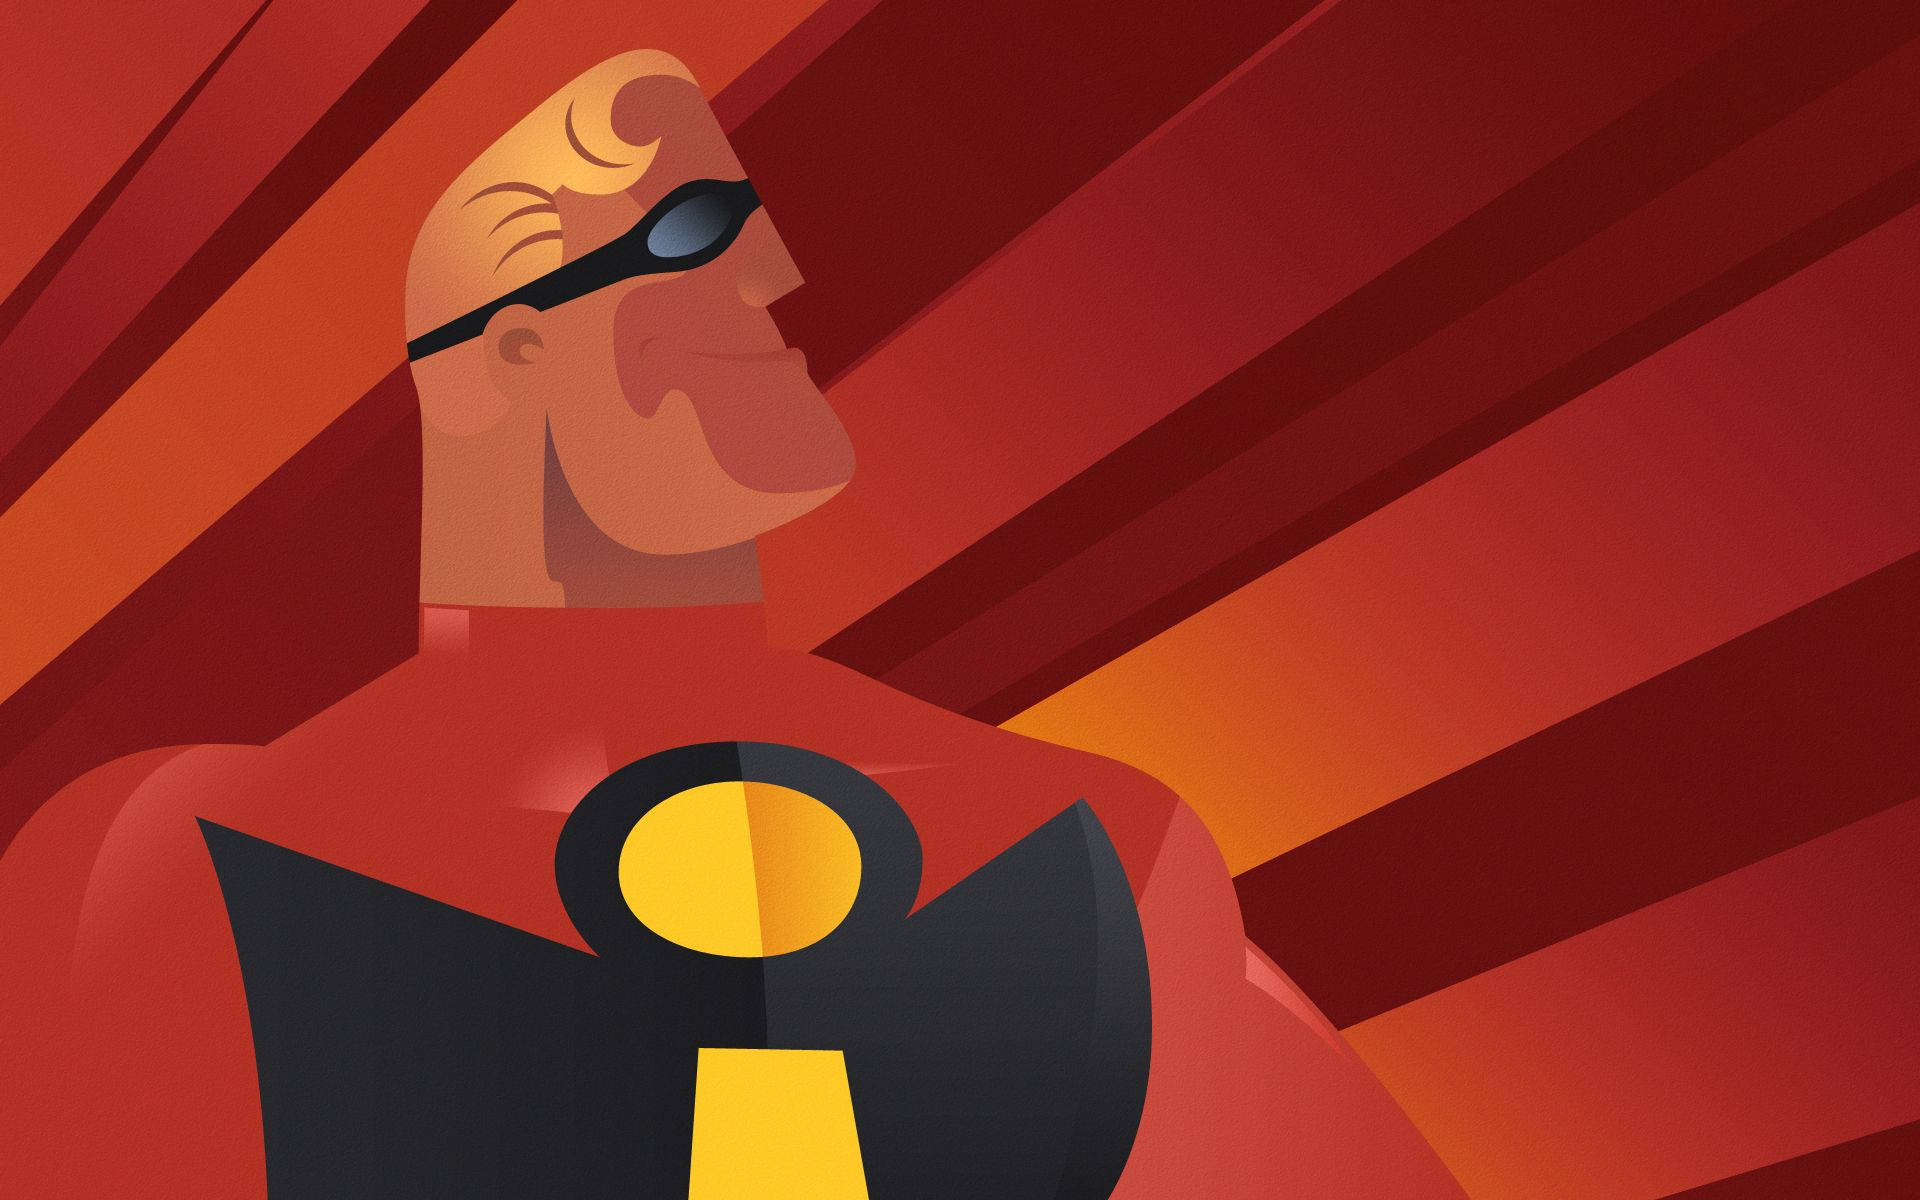 Mr Incredible - A Superhero With Unstoppable Strength Background